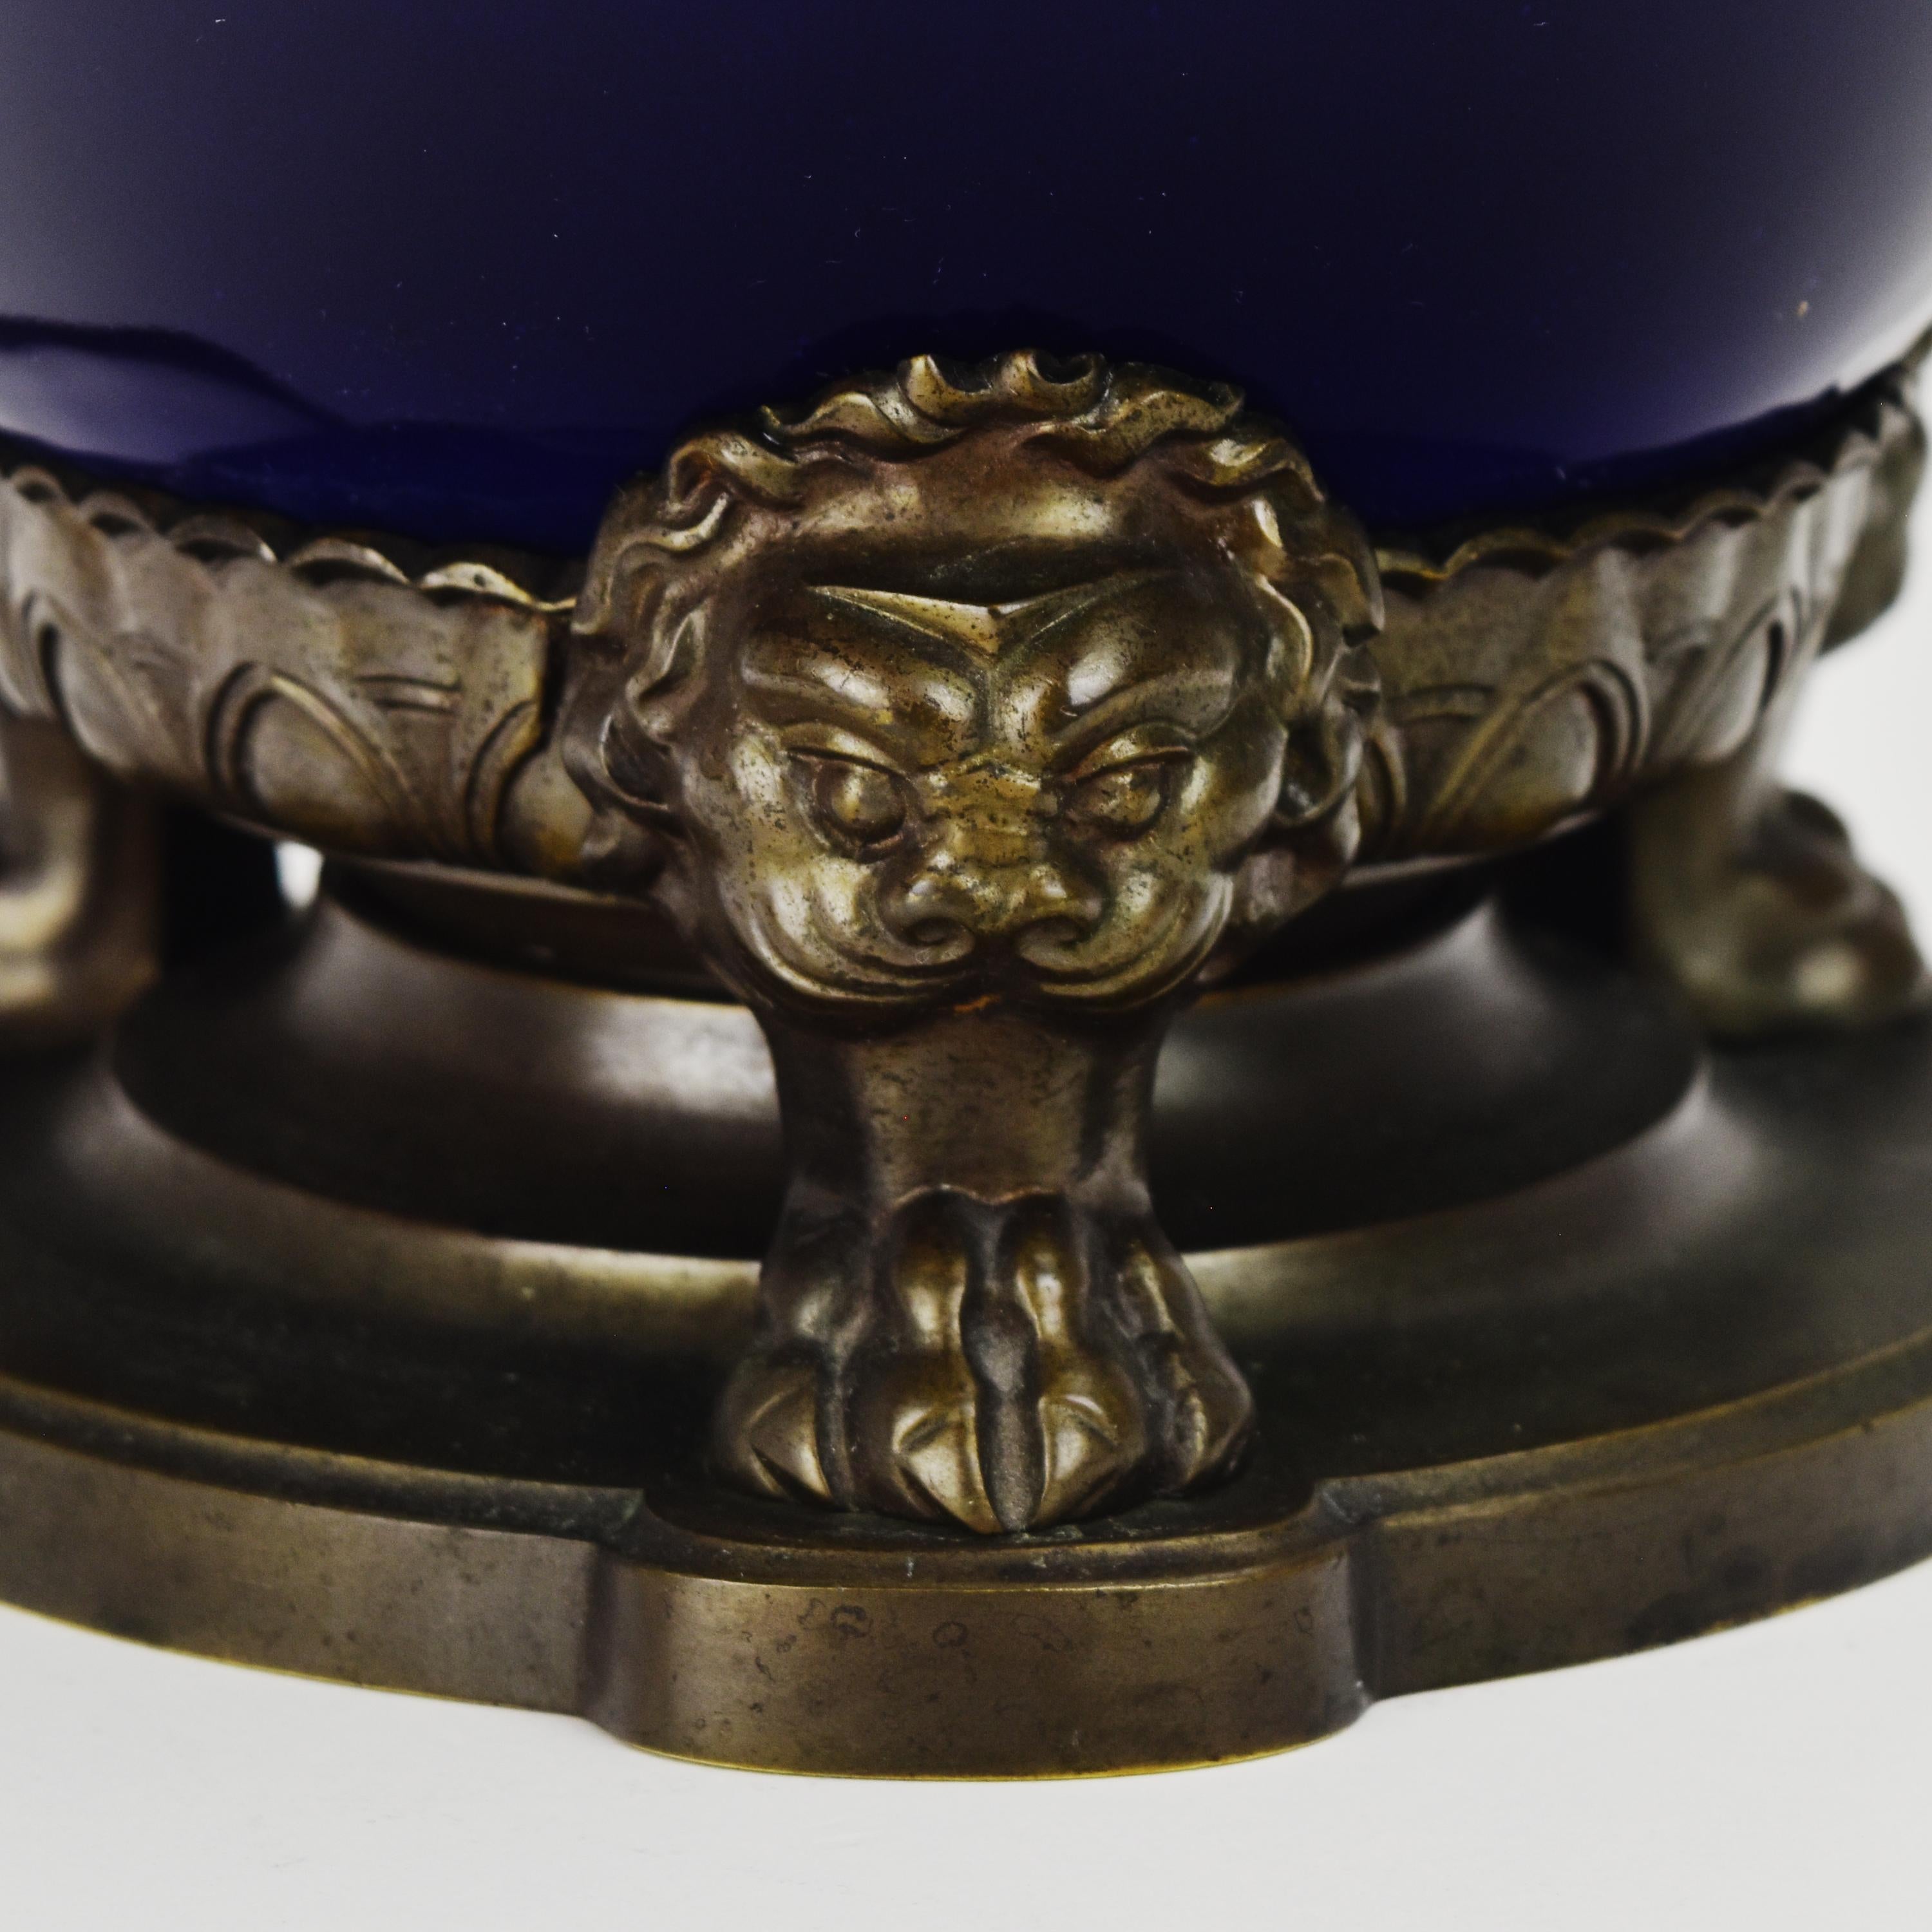 German Antique Table Lamp Rosenthal Porcelain Bronze Mounted Foo Dogs Chinese Style For Sale